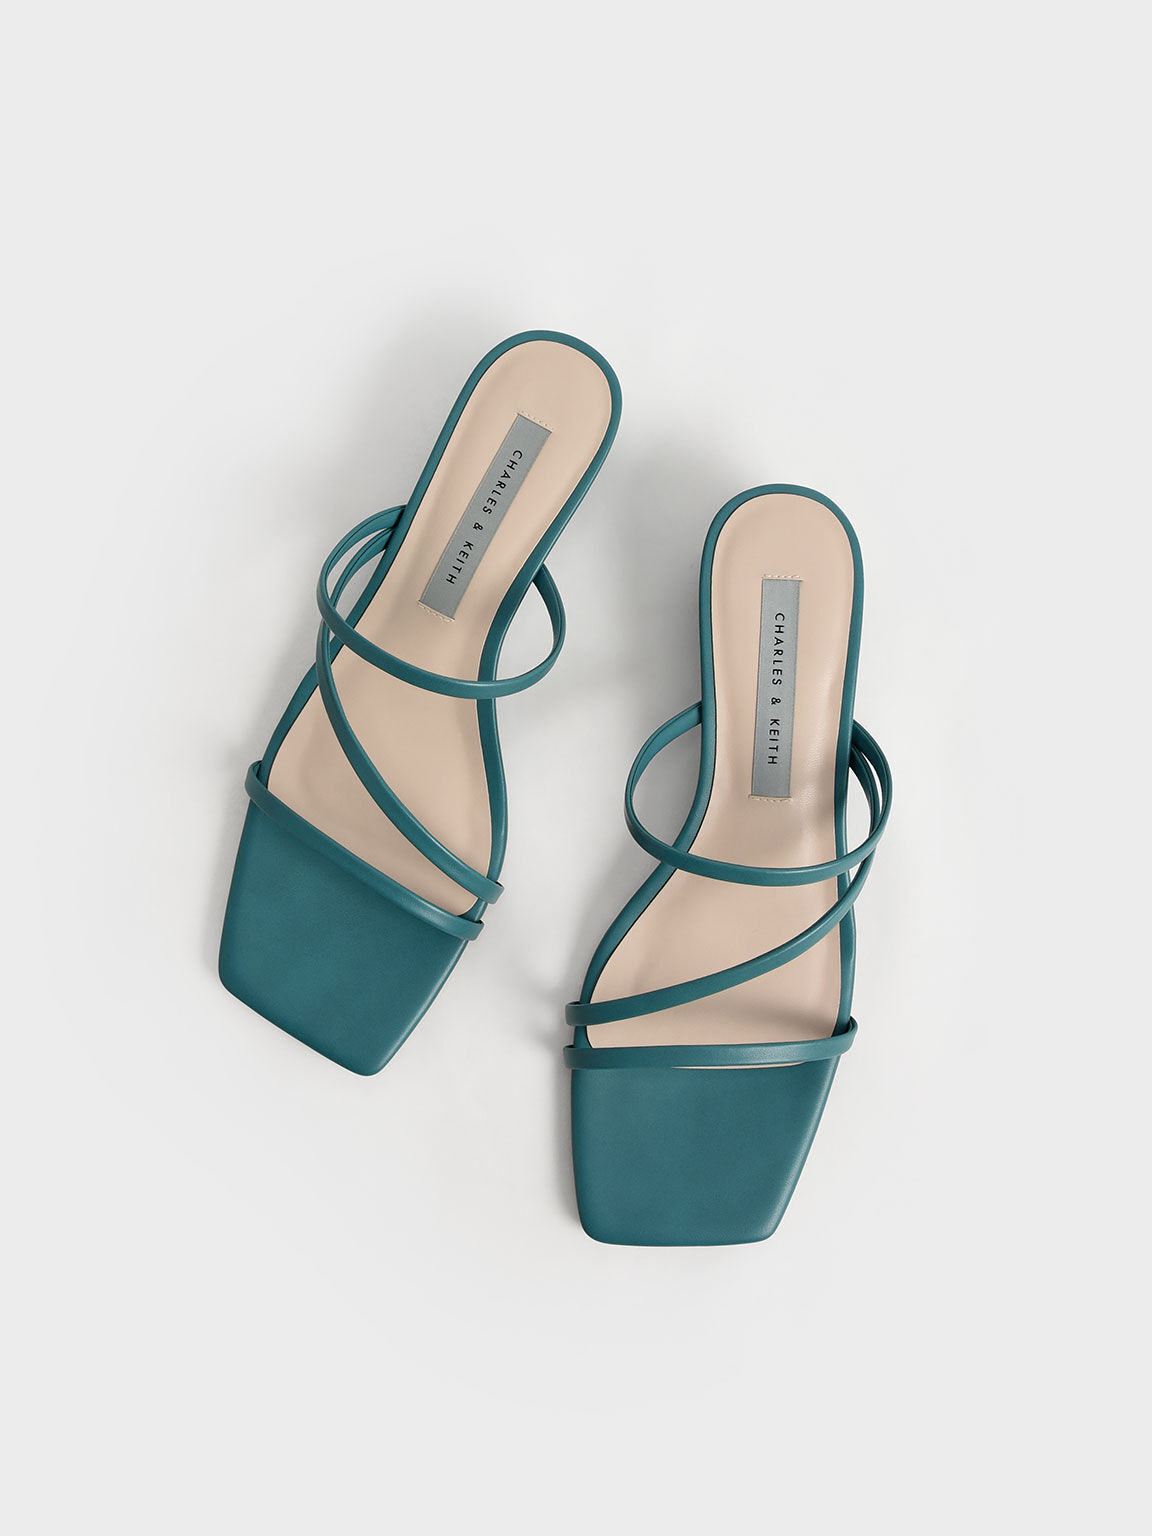 Strappy Wedge Mules, Green, hi-res